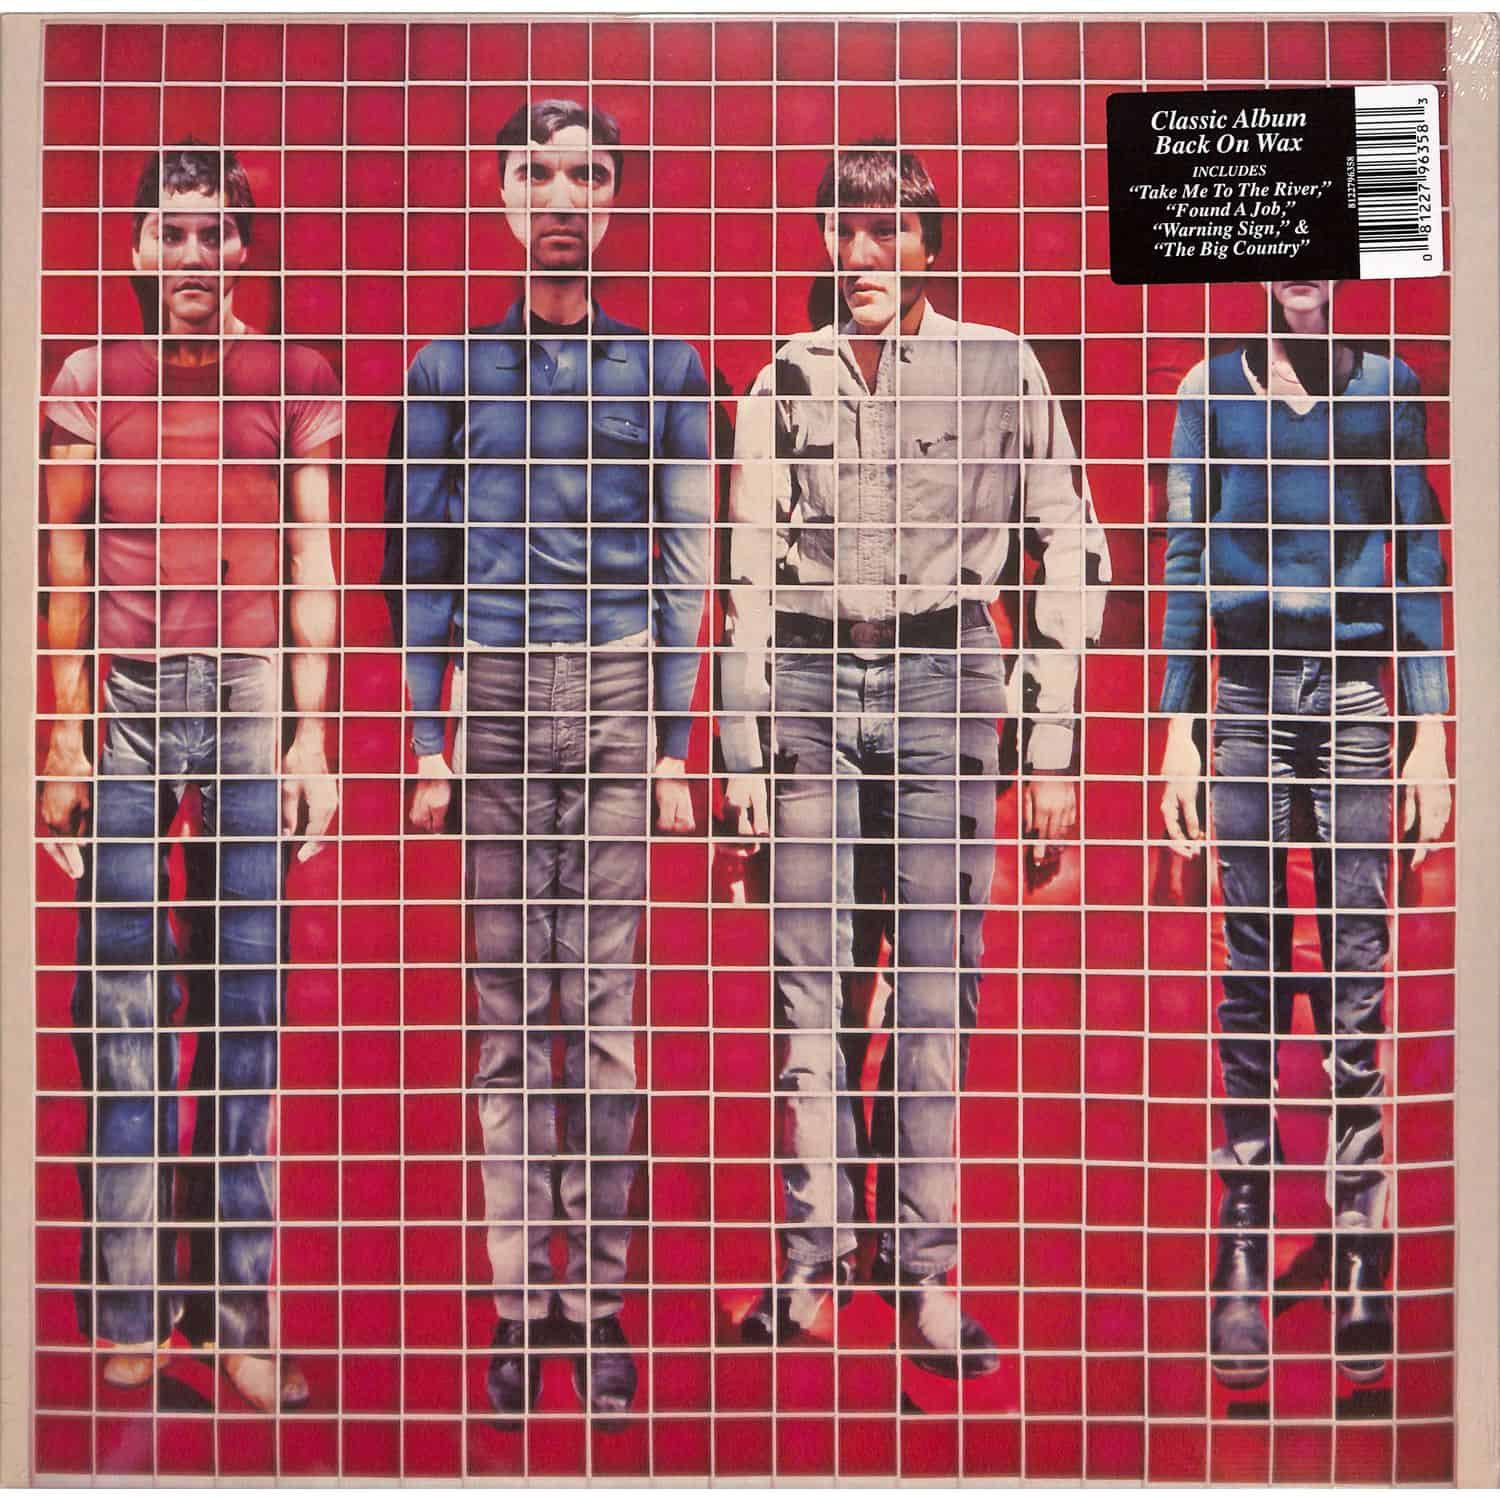 Talking Heads - MORE SONGS ABOUT BUILDINGS AND FOOD 